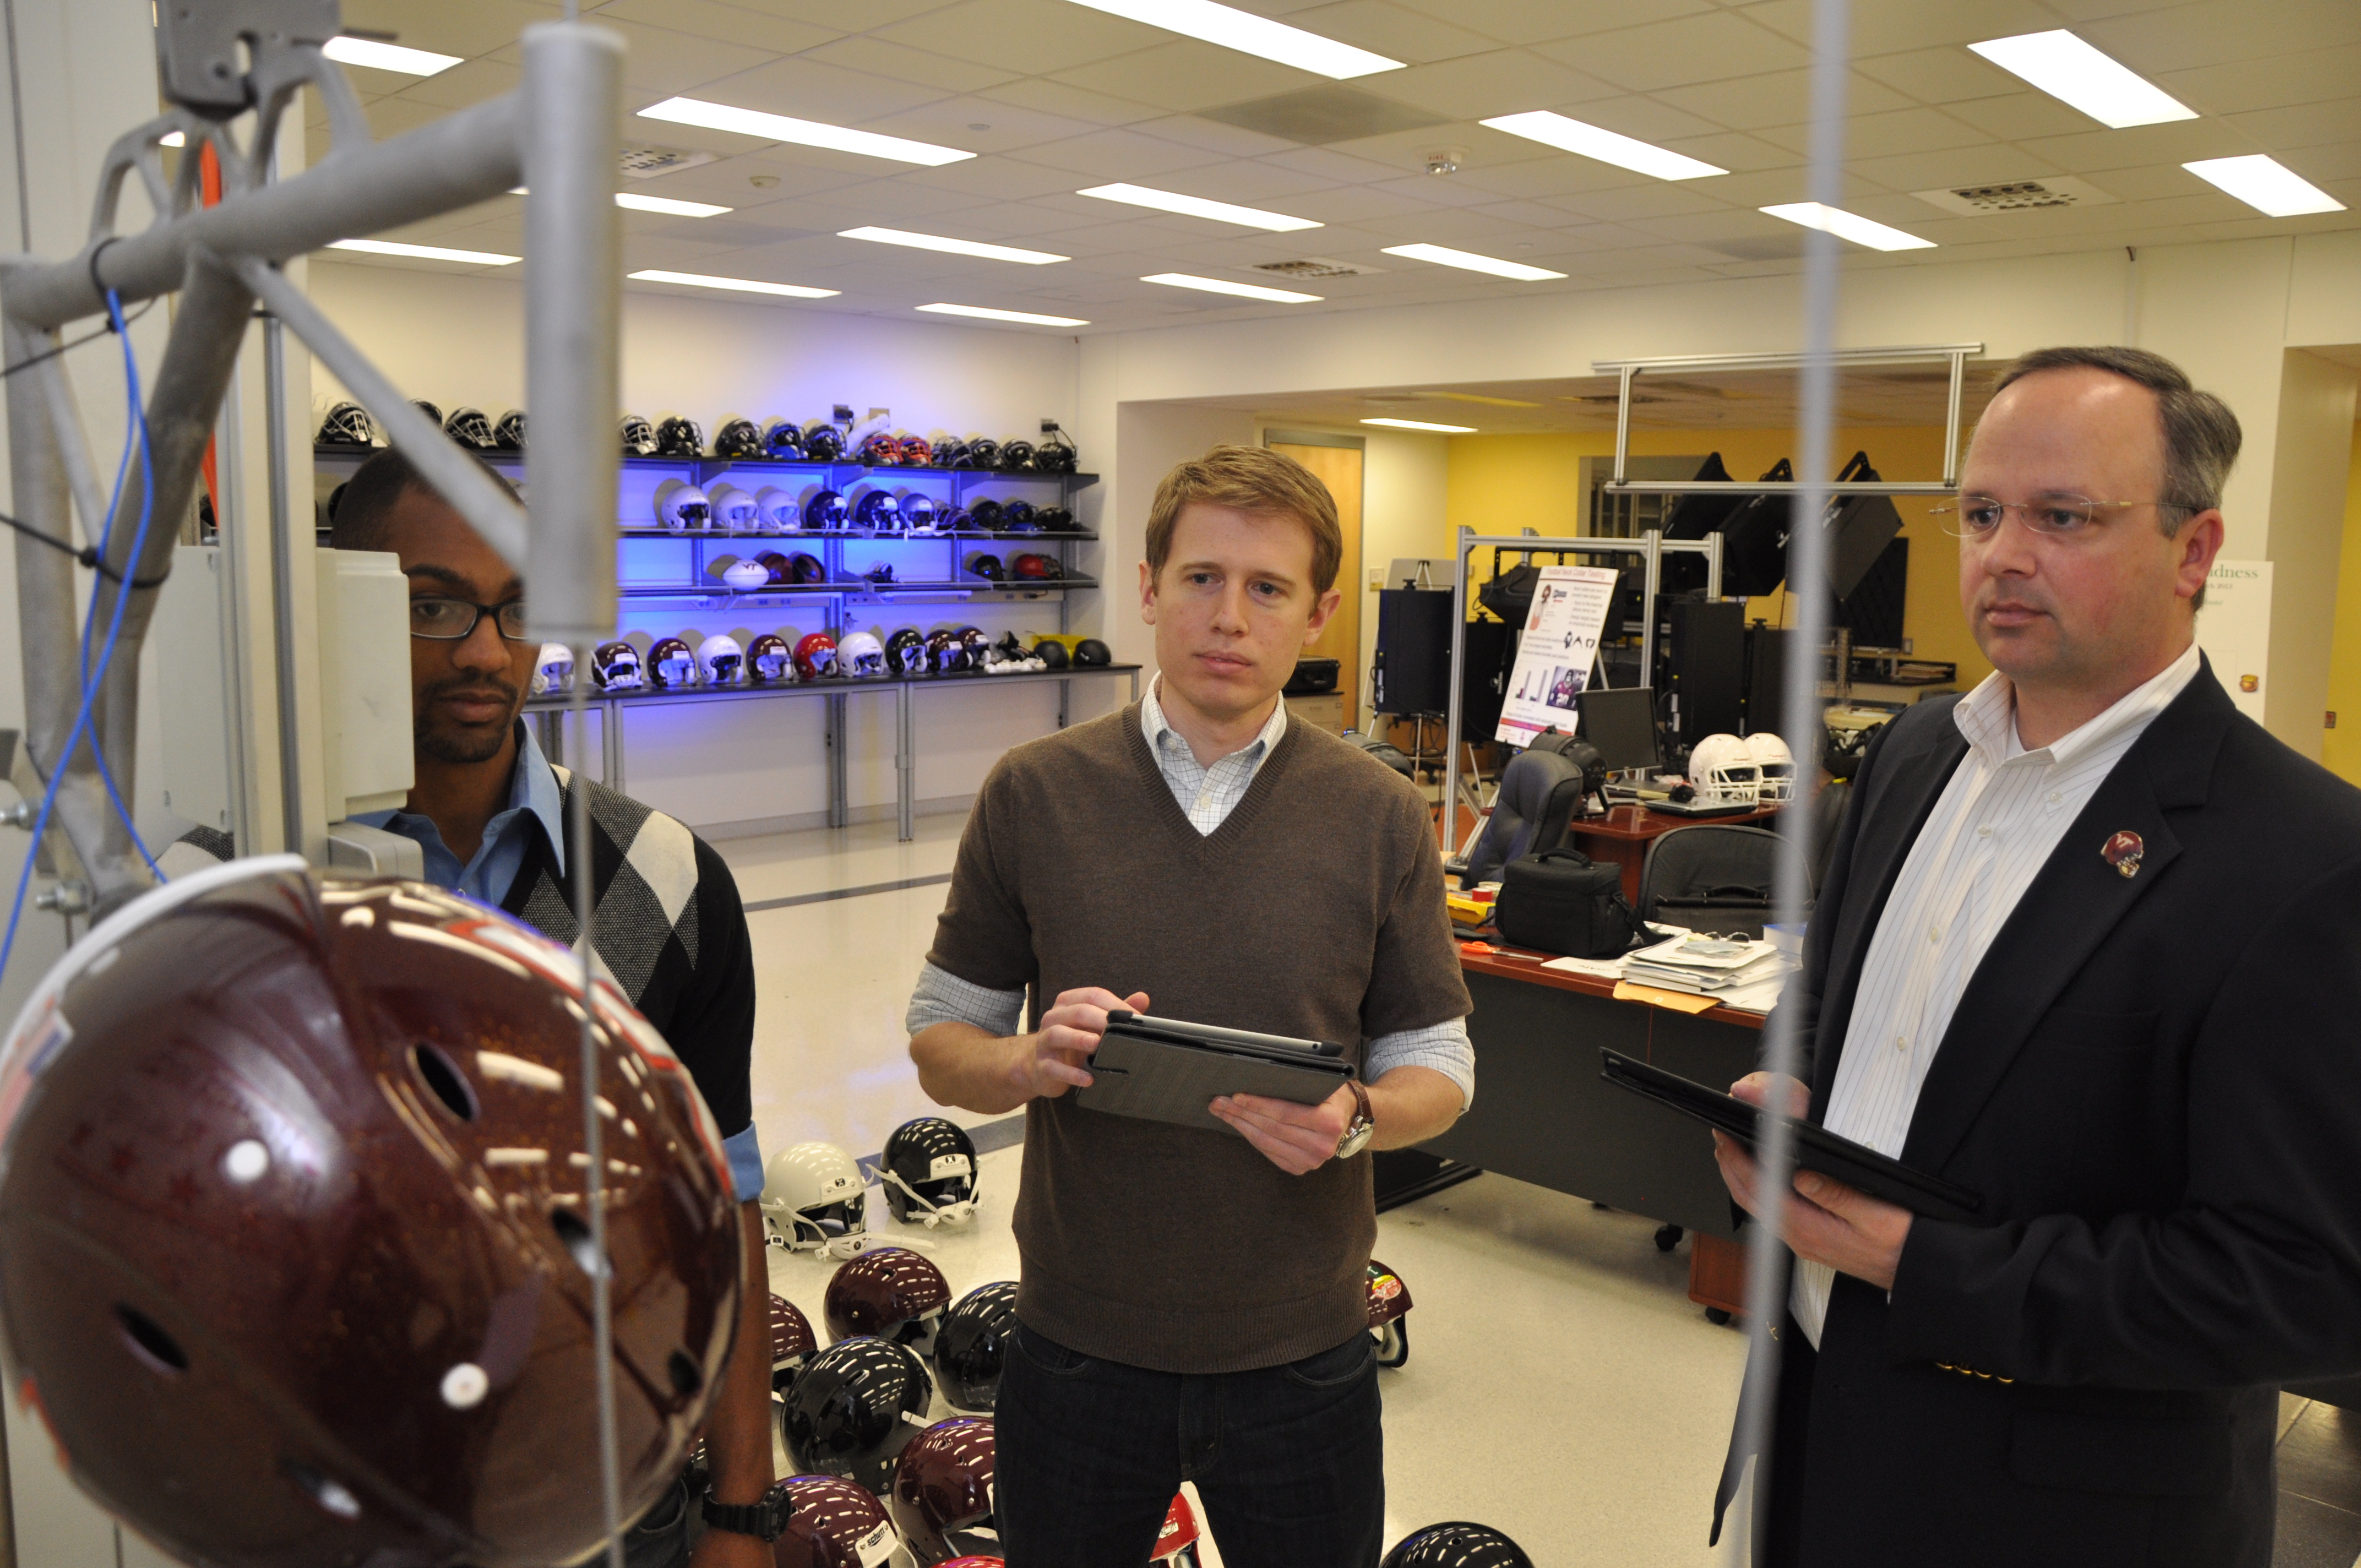 Testing the various football helmets for their ability to reduce the risk of concussions, from left to right, are: Steven Rowson, an assistant professor, and Stefan Duma, the Harry C. Wyatt Professor and department head, both of the Virginia Tech-Wake Forest School of Biomedical Engineering and Science.